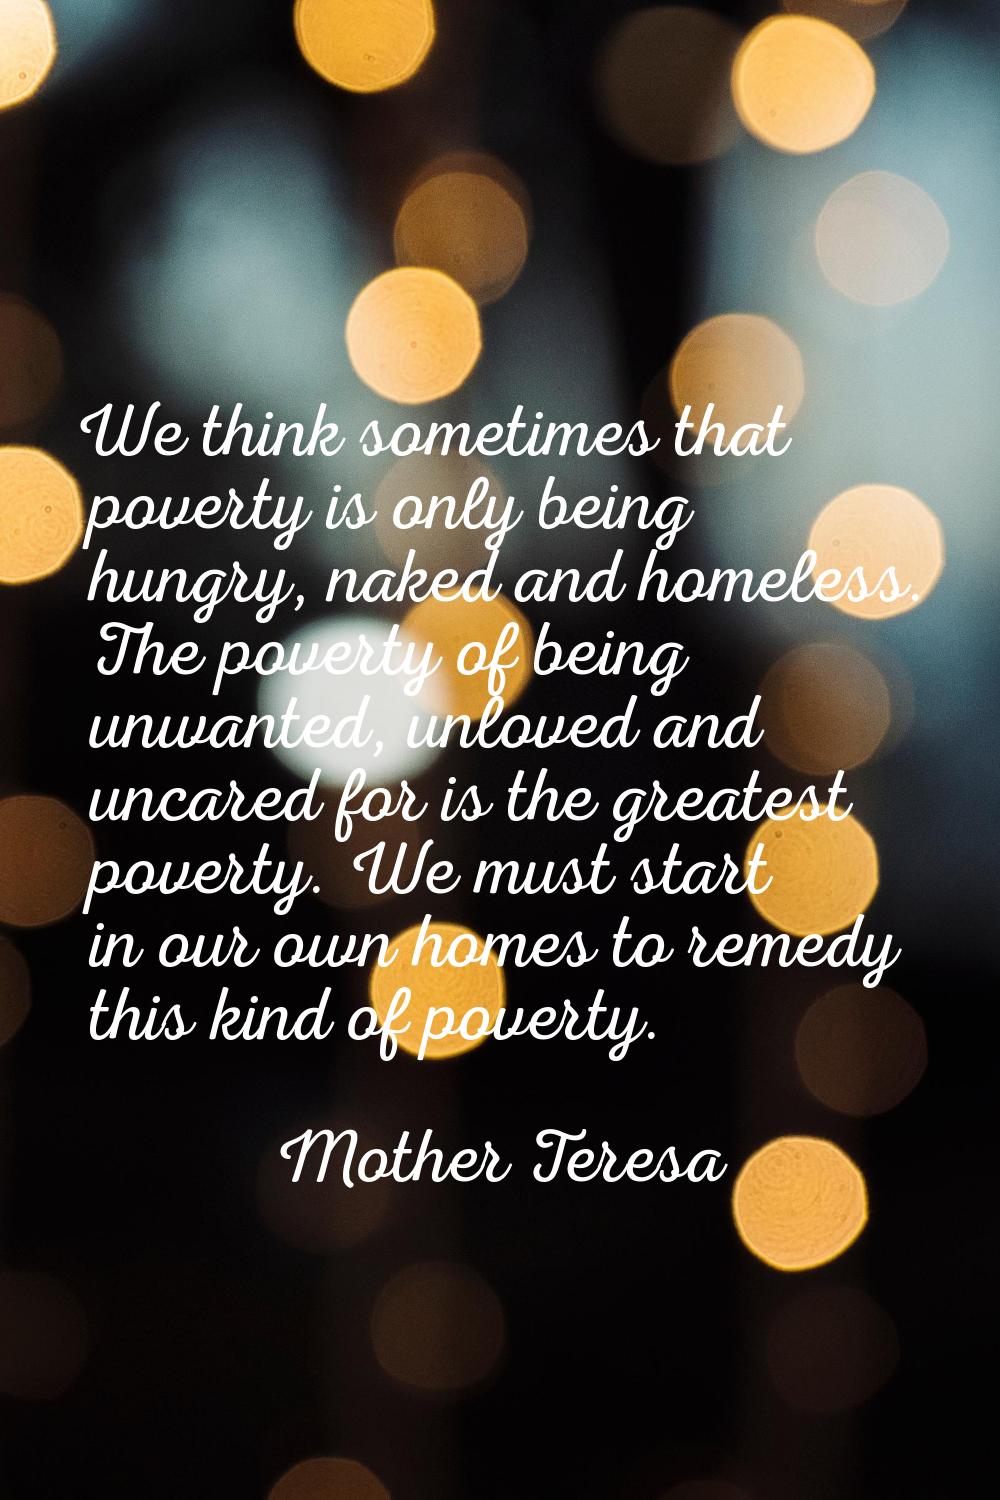 We think sometimes that poverty is only being hungry, naked and homeless. The poverty of being unwa